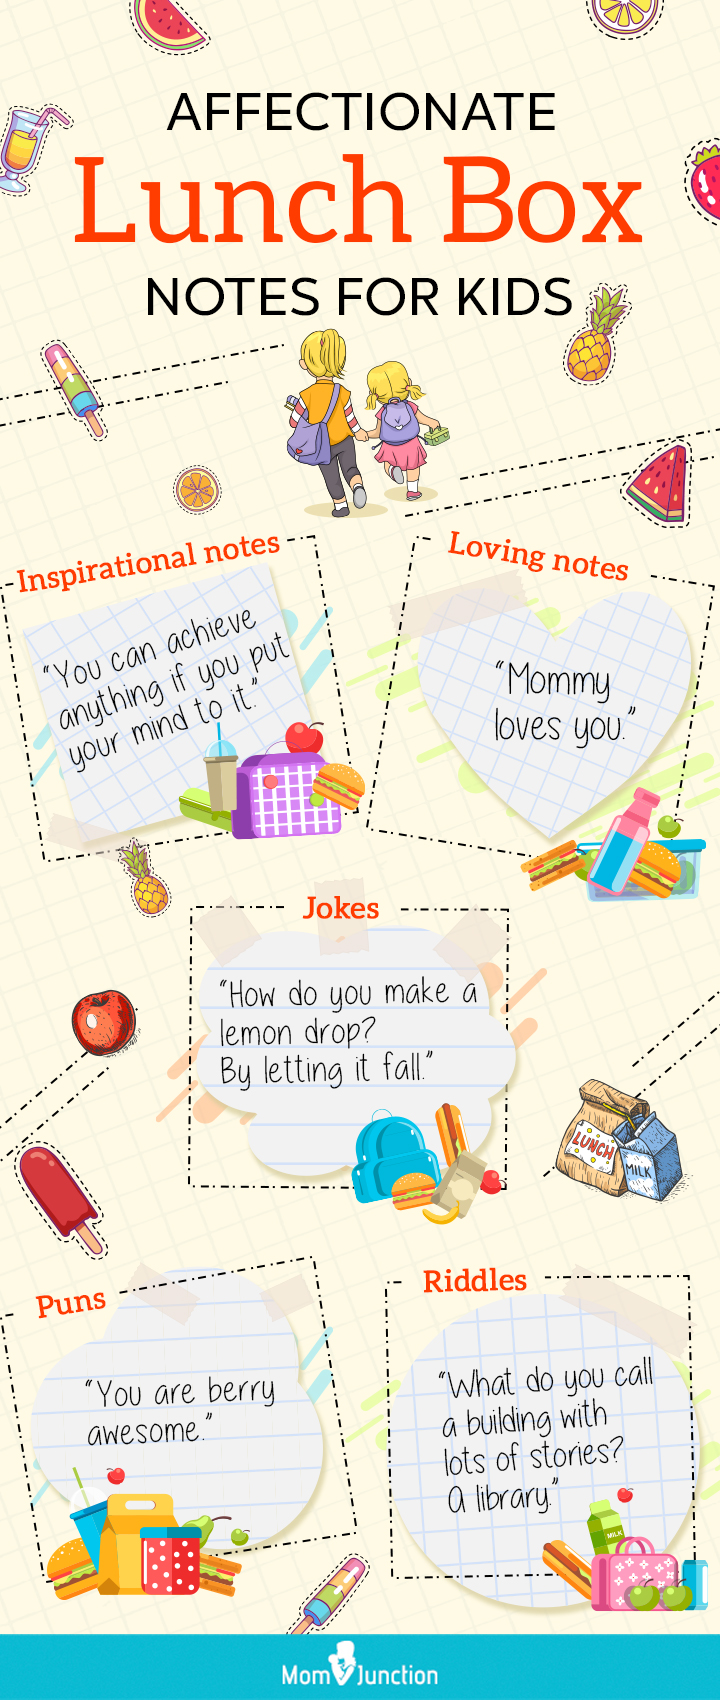 https://www.momjunction.com/wp-content/uploads/2021/02/Affectionate-lunch-box-notes-for-kids-Infographic.jpg